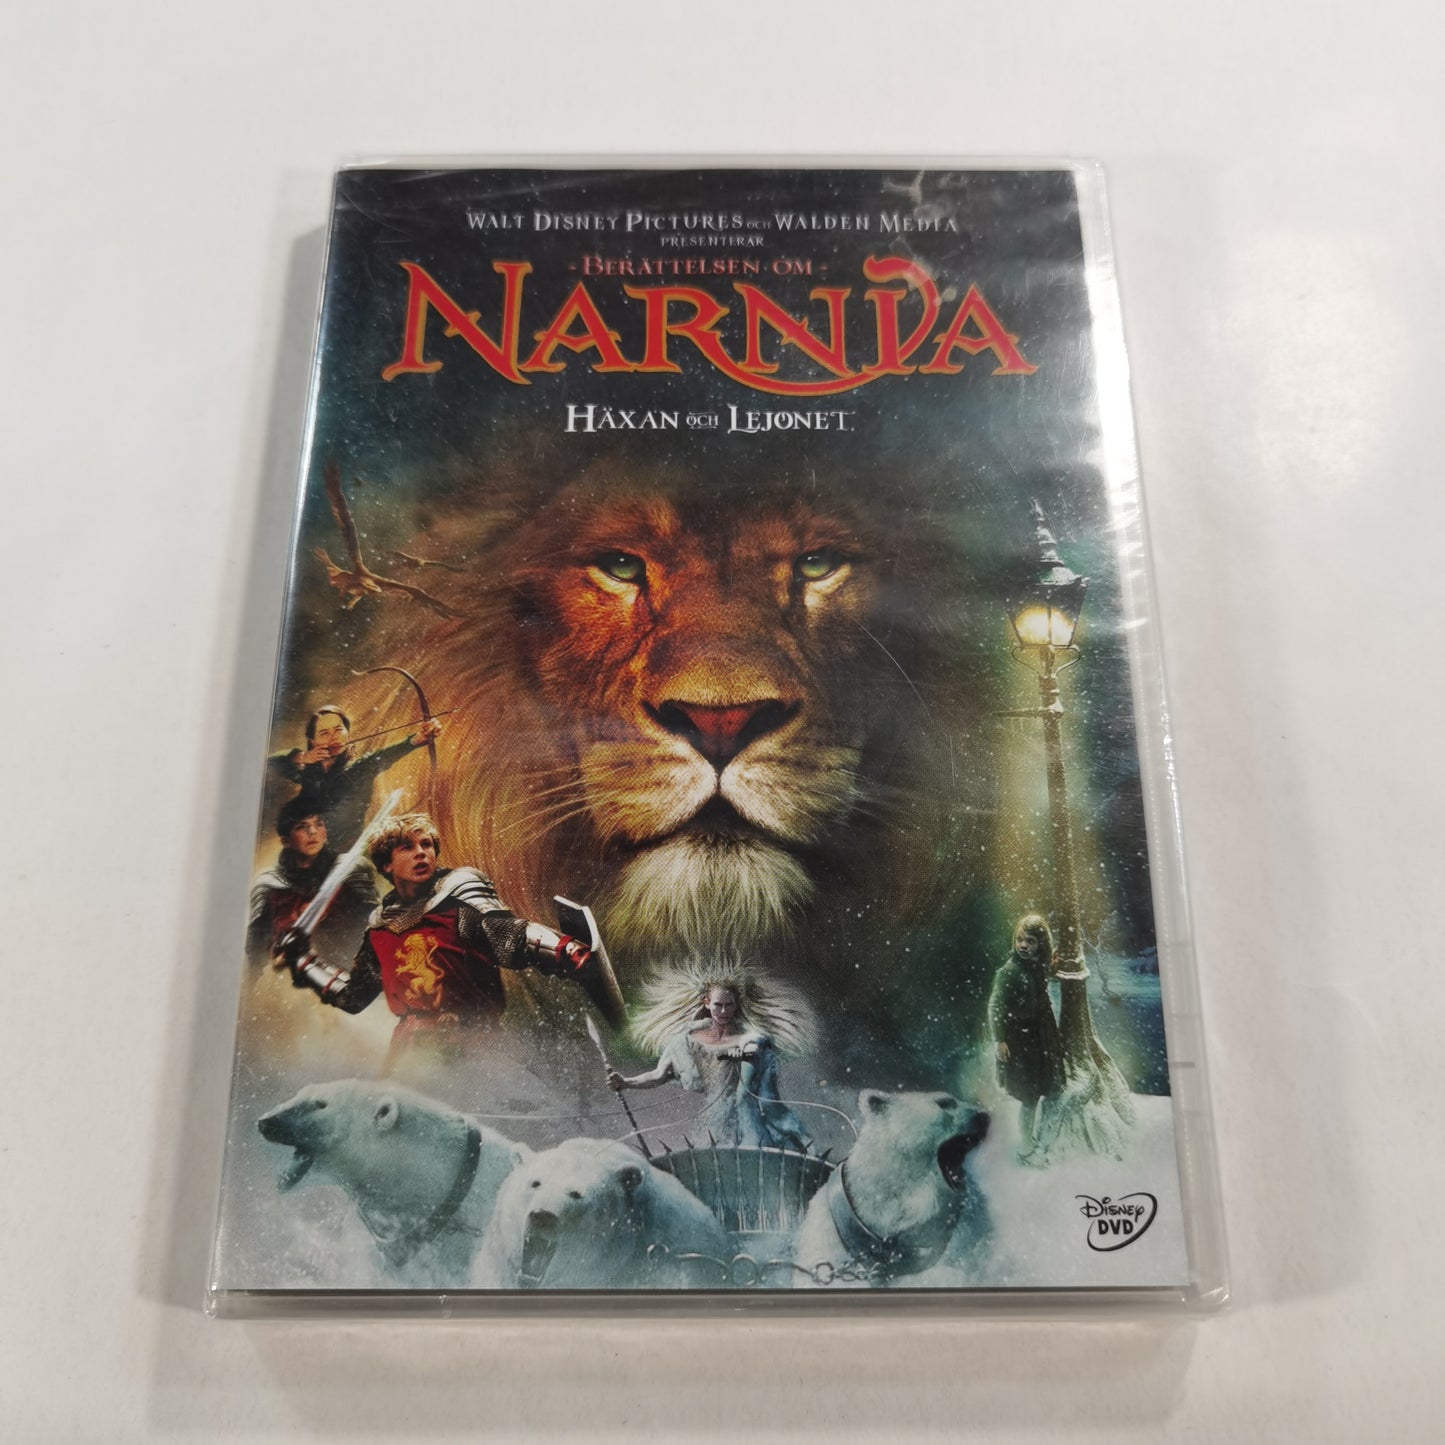 The Chronicles of Narnia: The Lion, the Witch and the Wardrobe (2005) - DVD SE NEW!